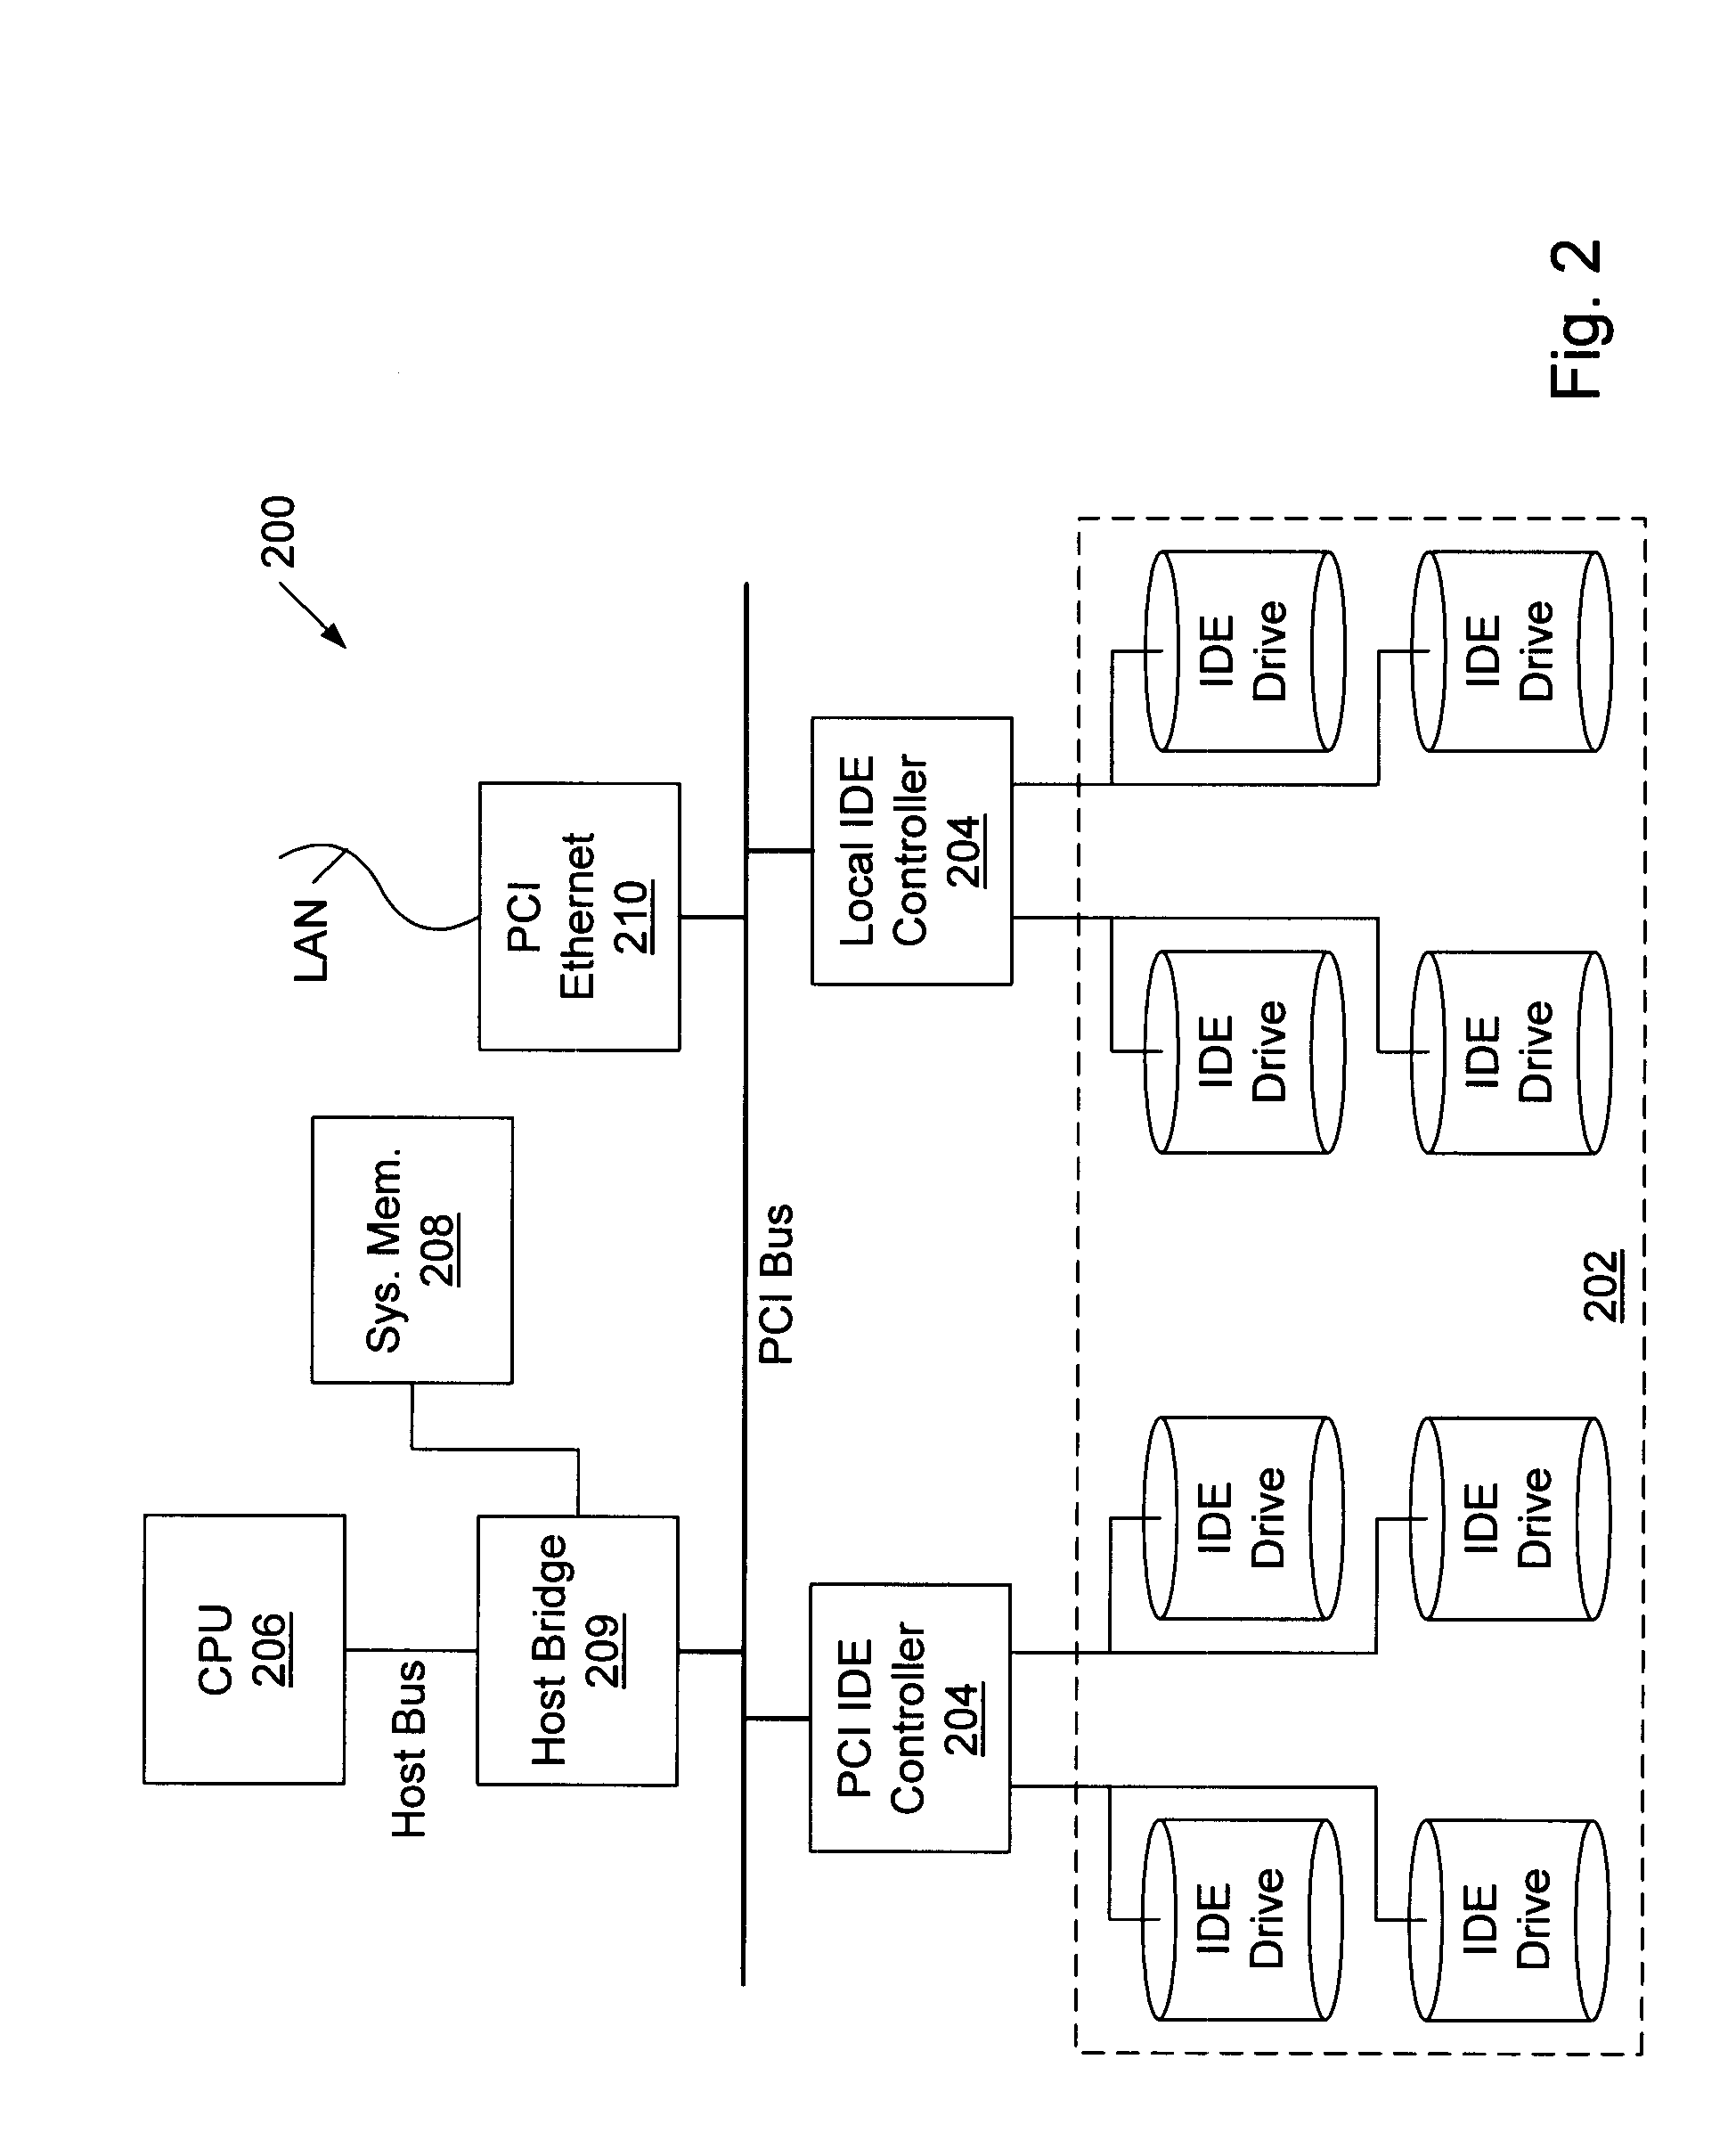 High density packaging for multi-disk systems